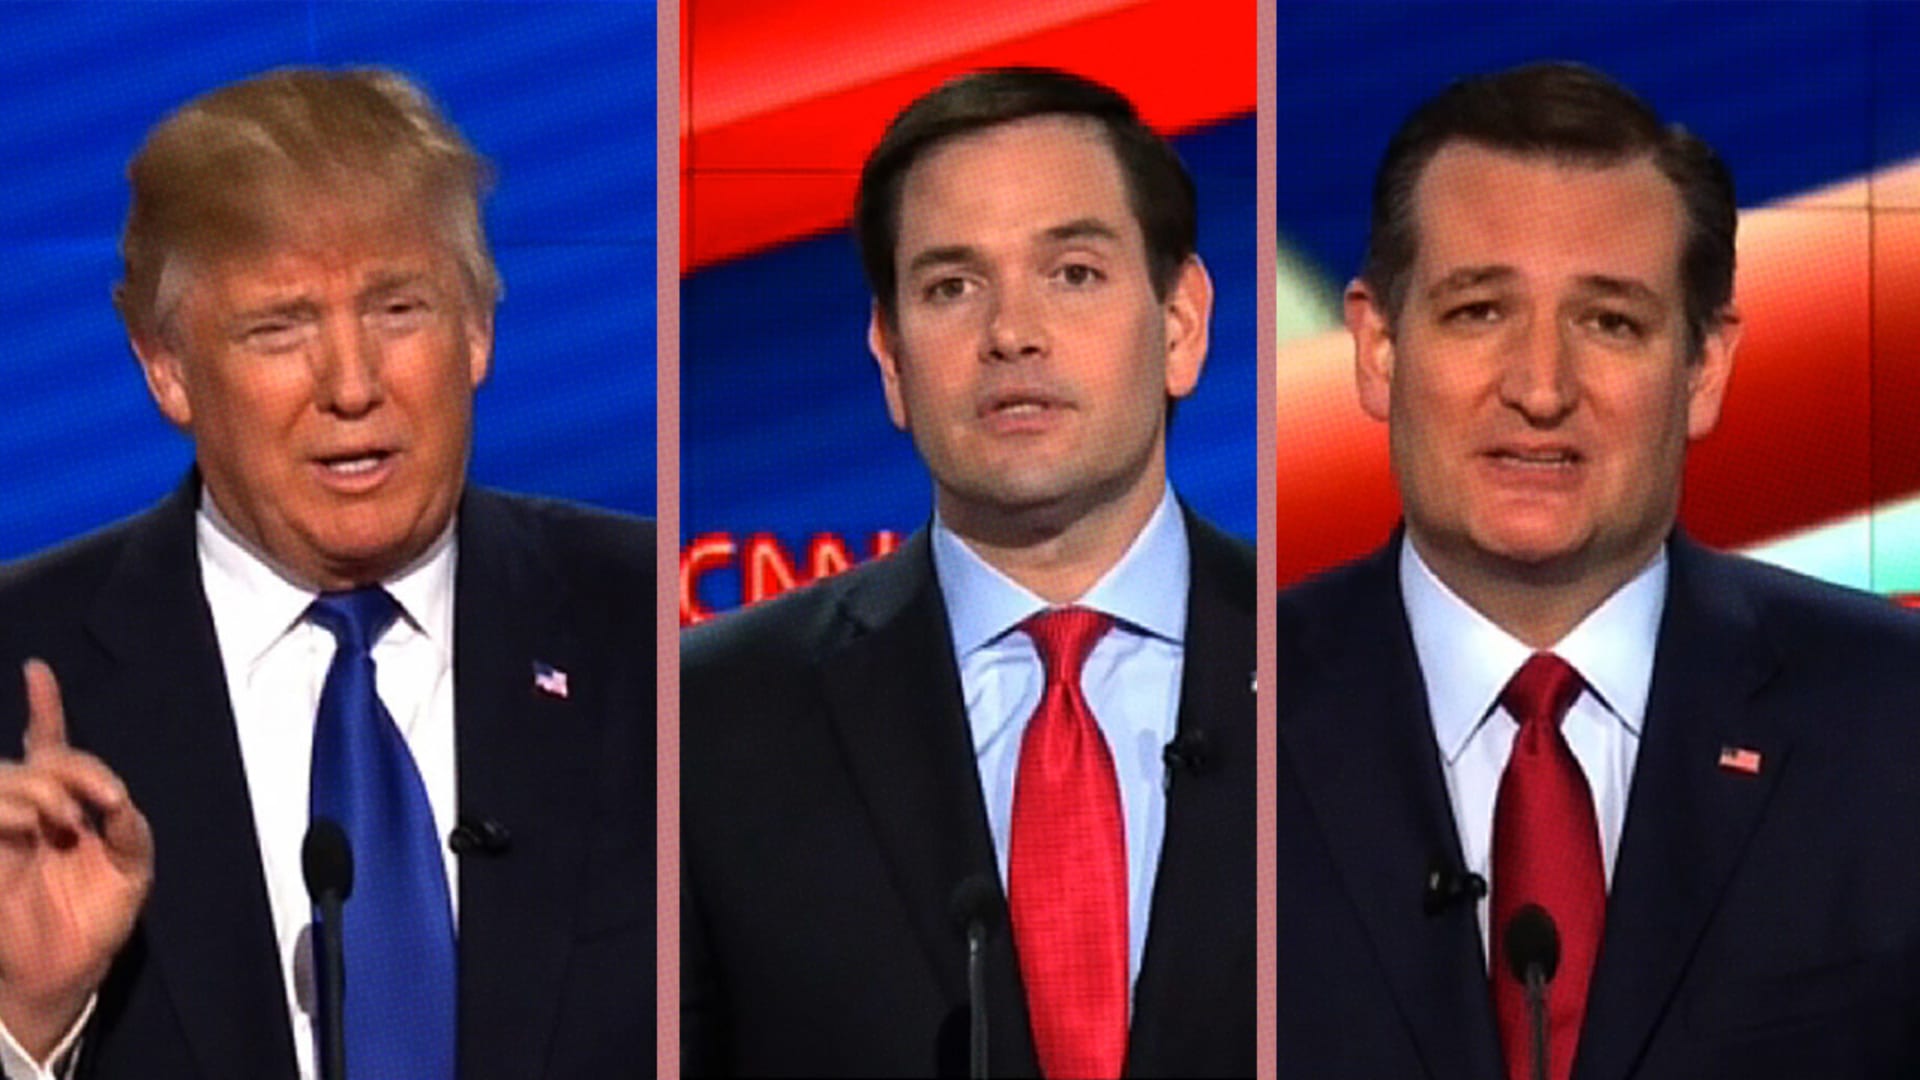 Decoding The Facial Expressions Of The GOP Candidates